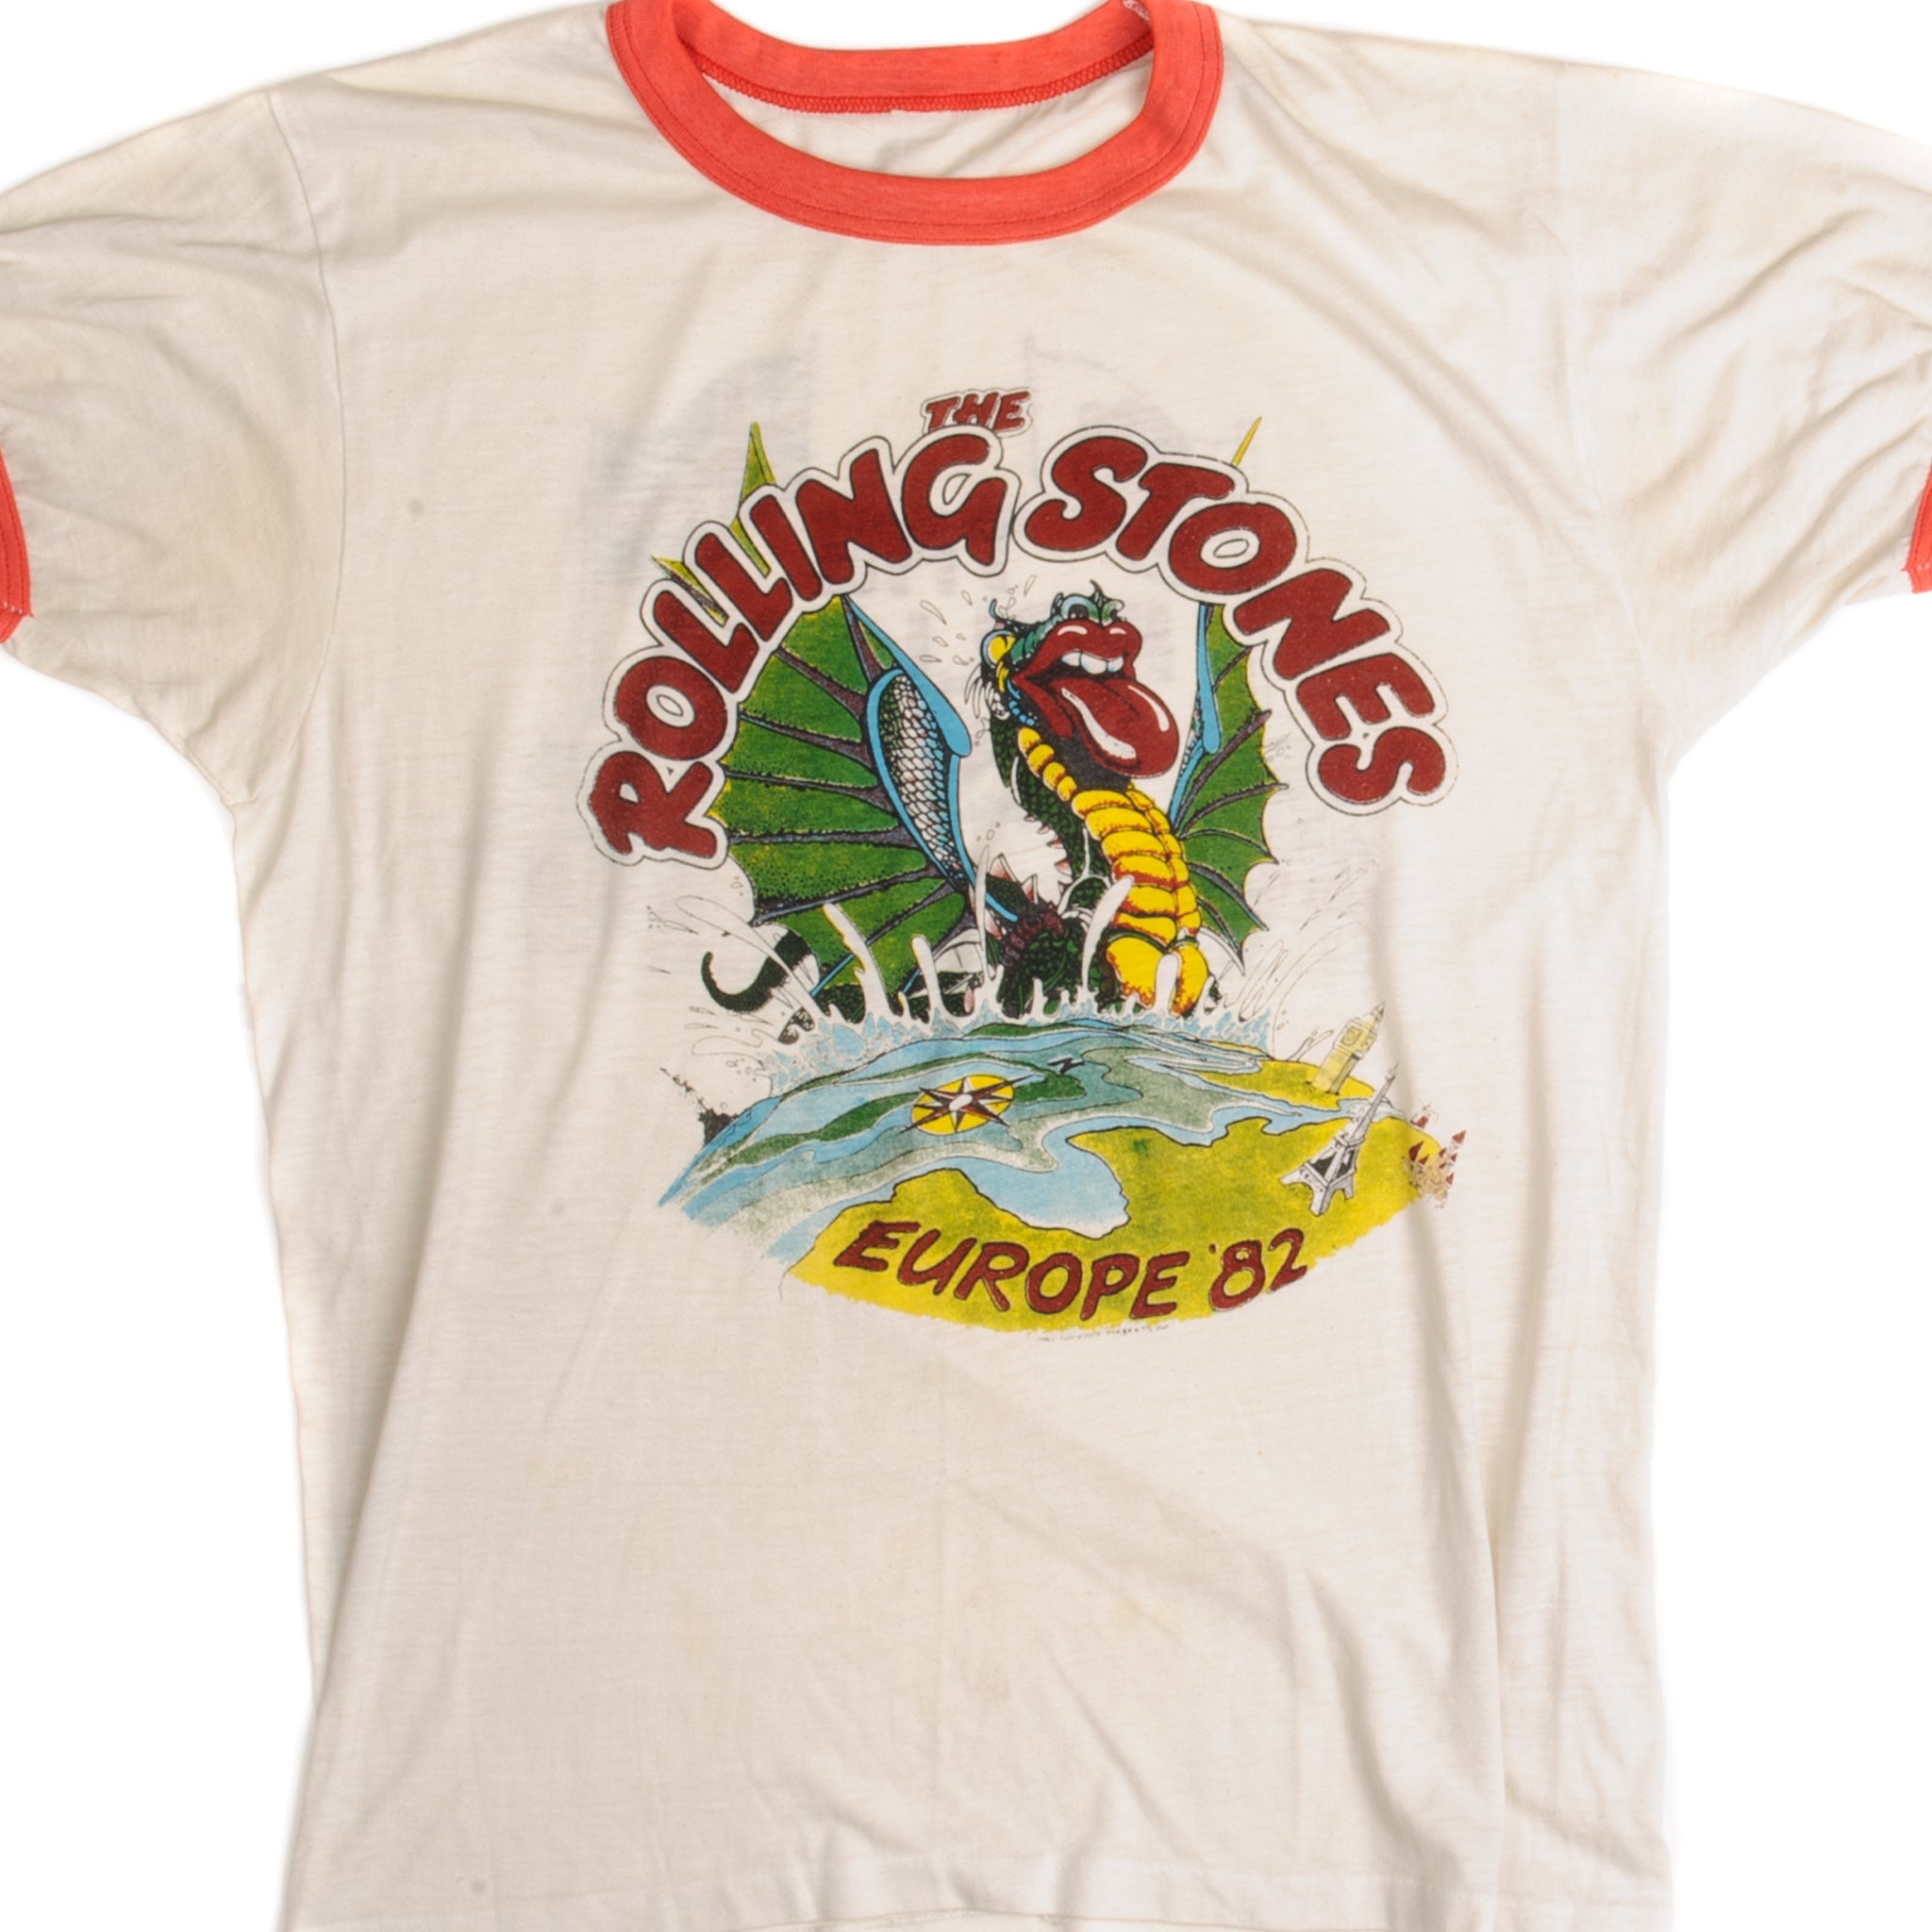 VINTAGE THE ROLLING STONES EUROPE'82 TOUR TEE SHIRT 1982 SIZE